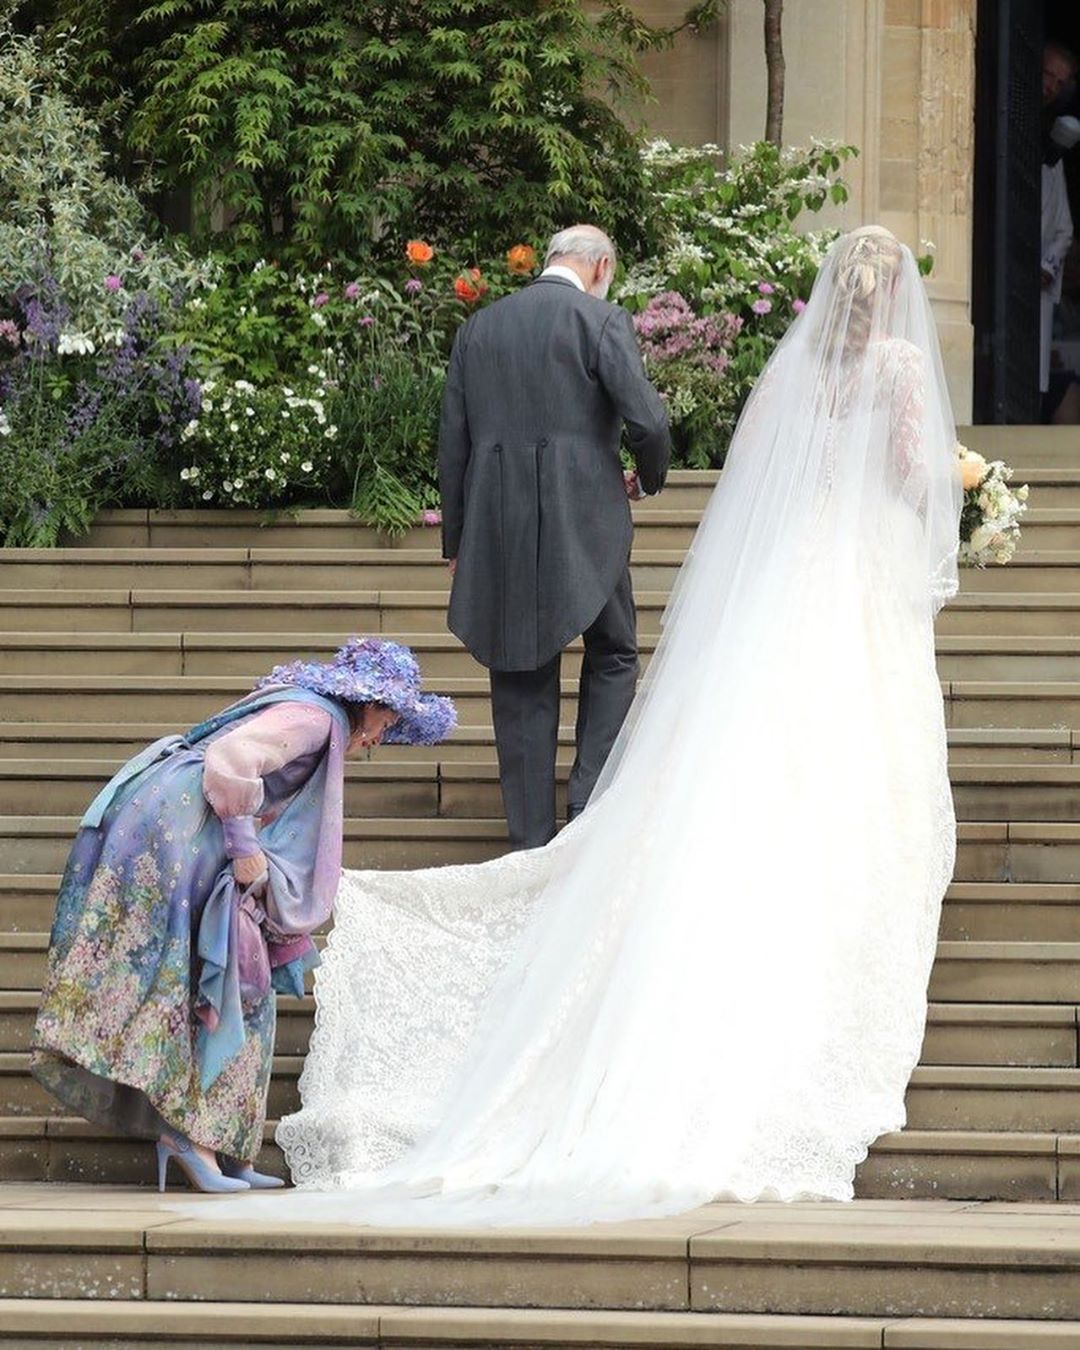 The Wedding of Lady Gabriella Windsor and Mr Thomas Kingston – The Real ...